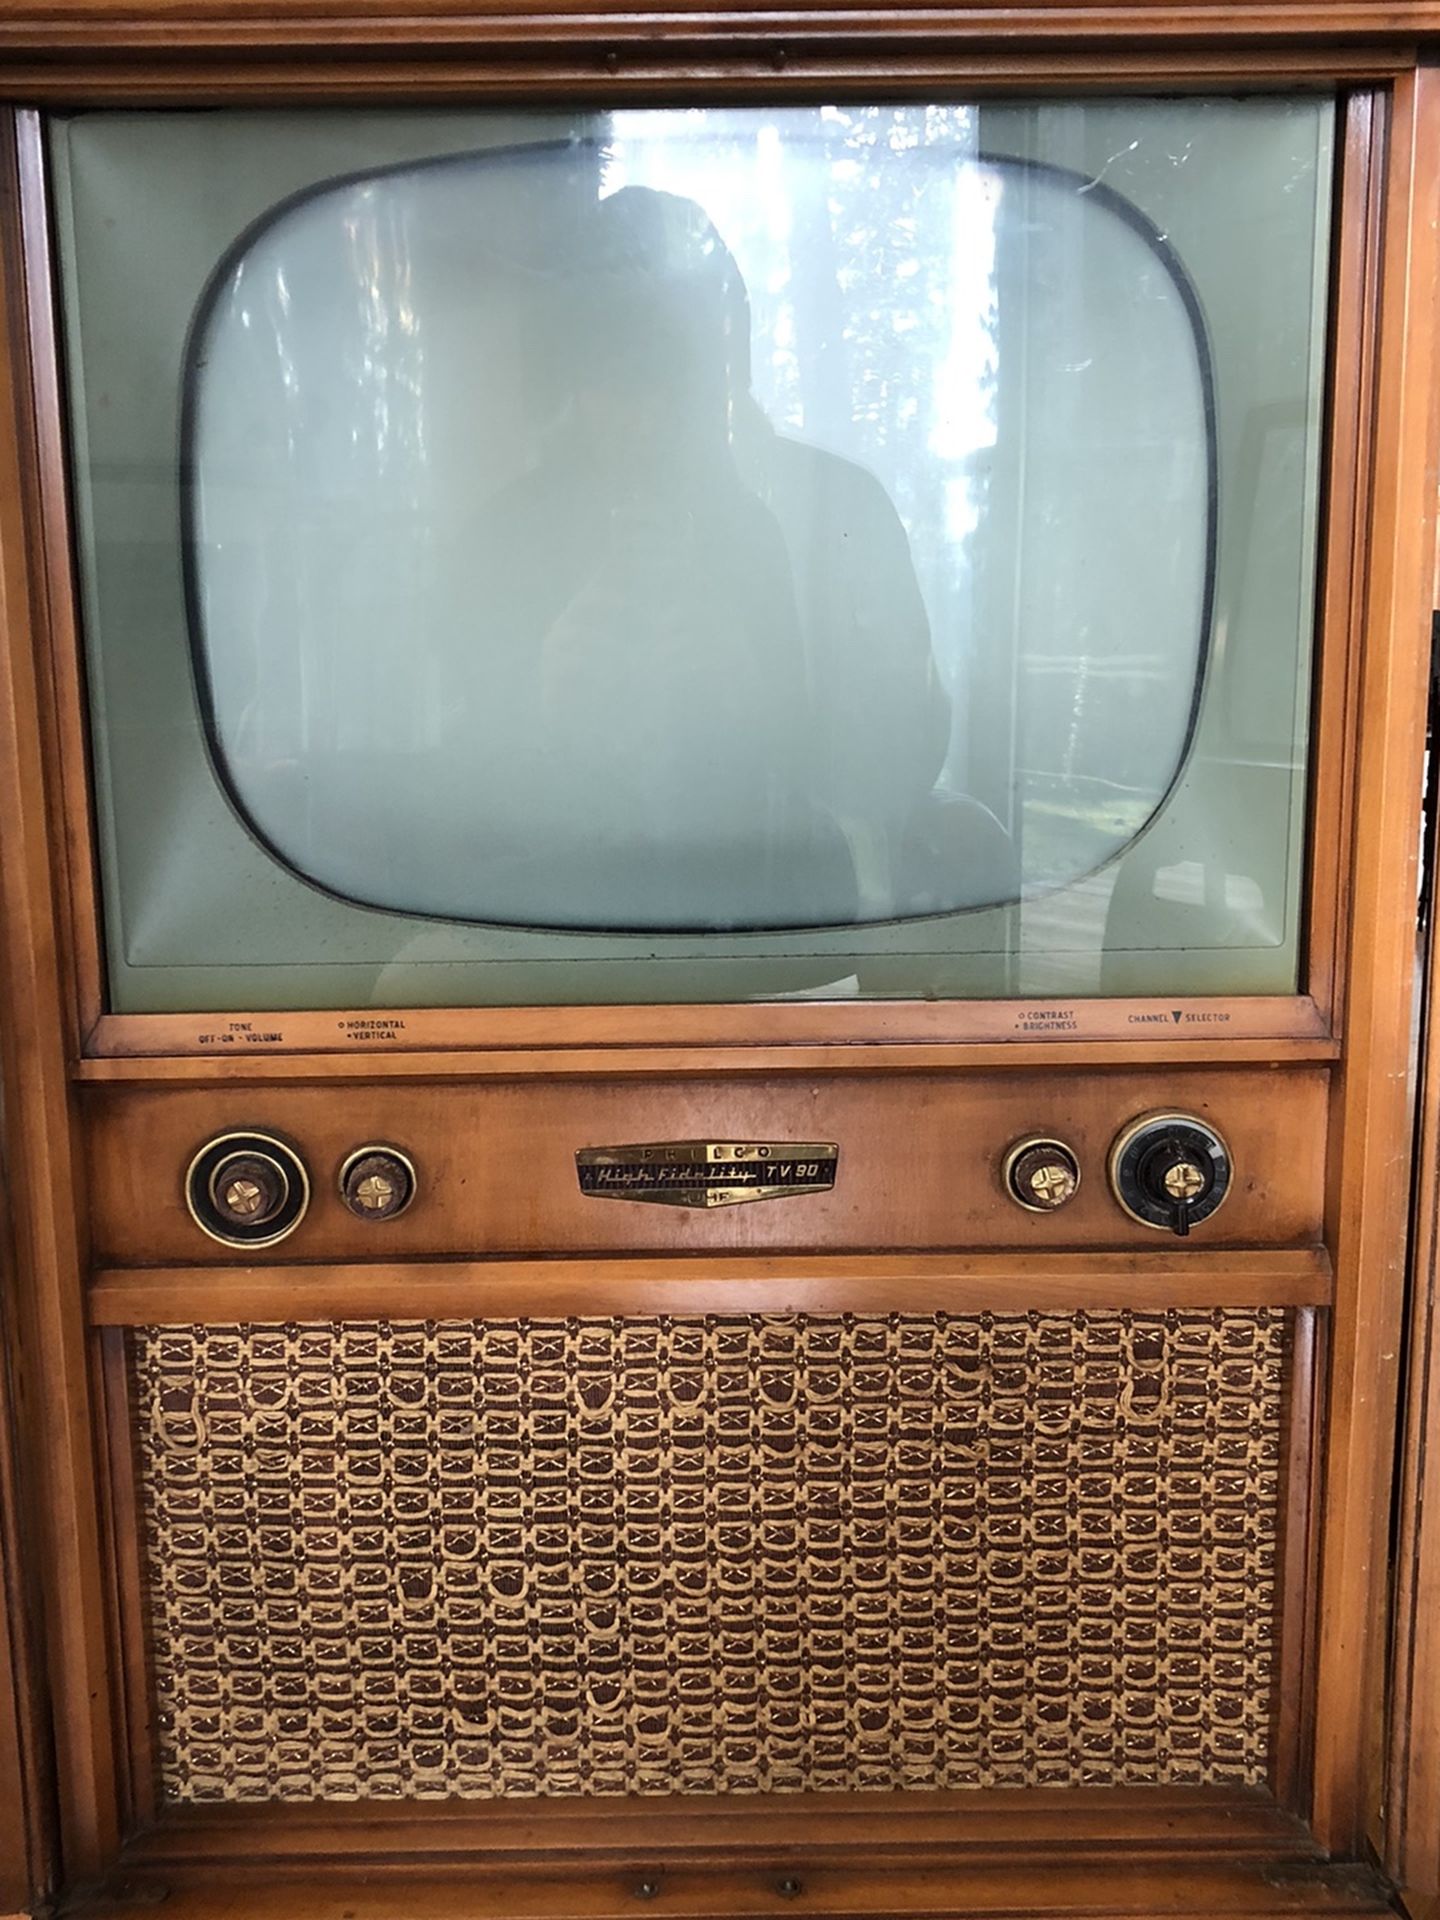 Beautiful 1950s Philco high Fidelity TV 80 television in wood cabinet